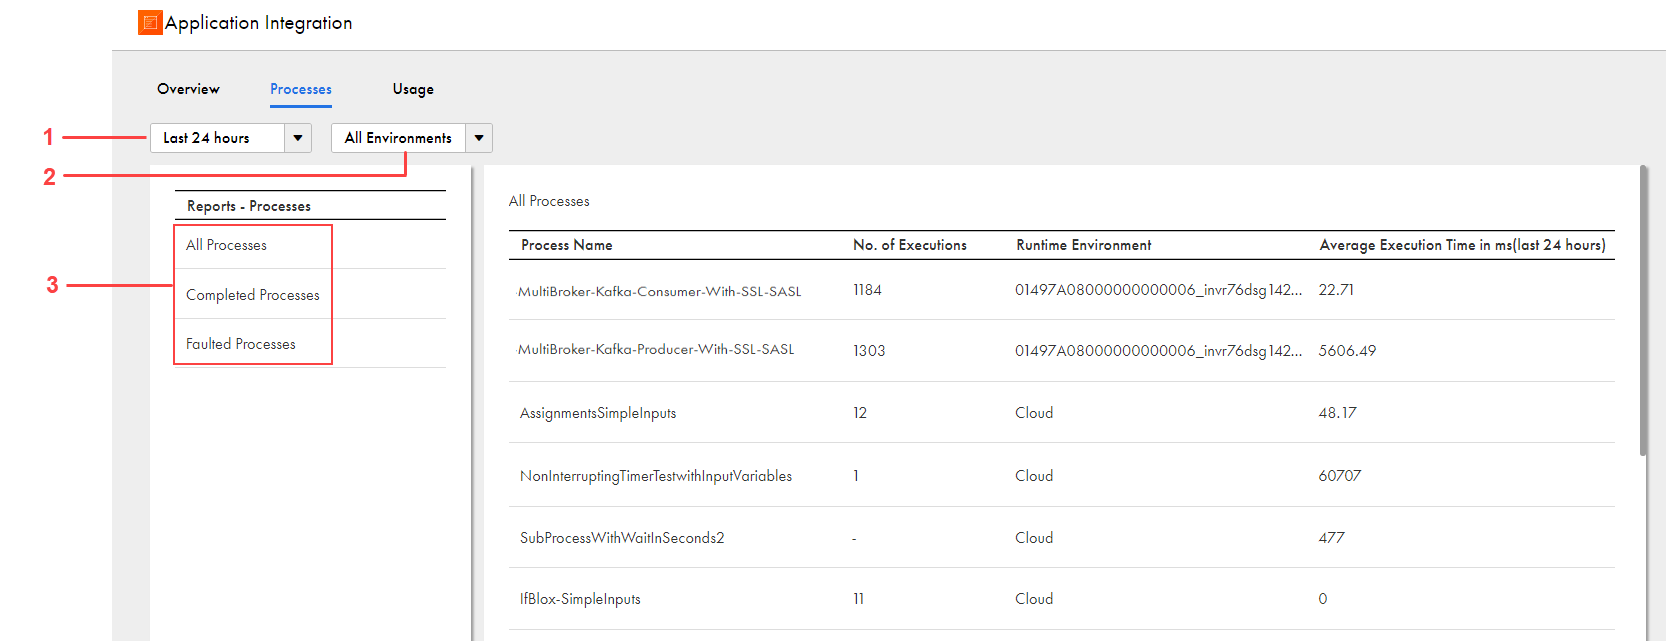 The Processes page shows reports about the status and details of processes that were run in your organization for a selected time period and runtime environment or runtime environment category. 
		  